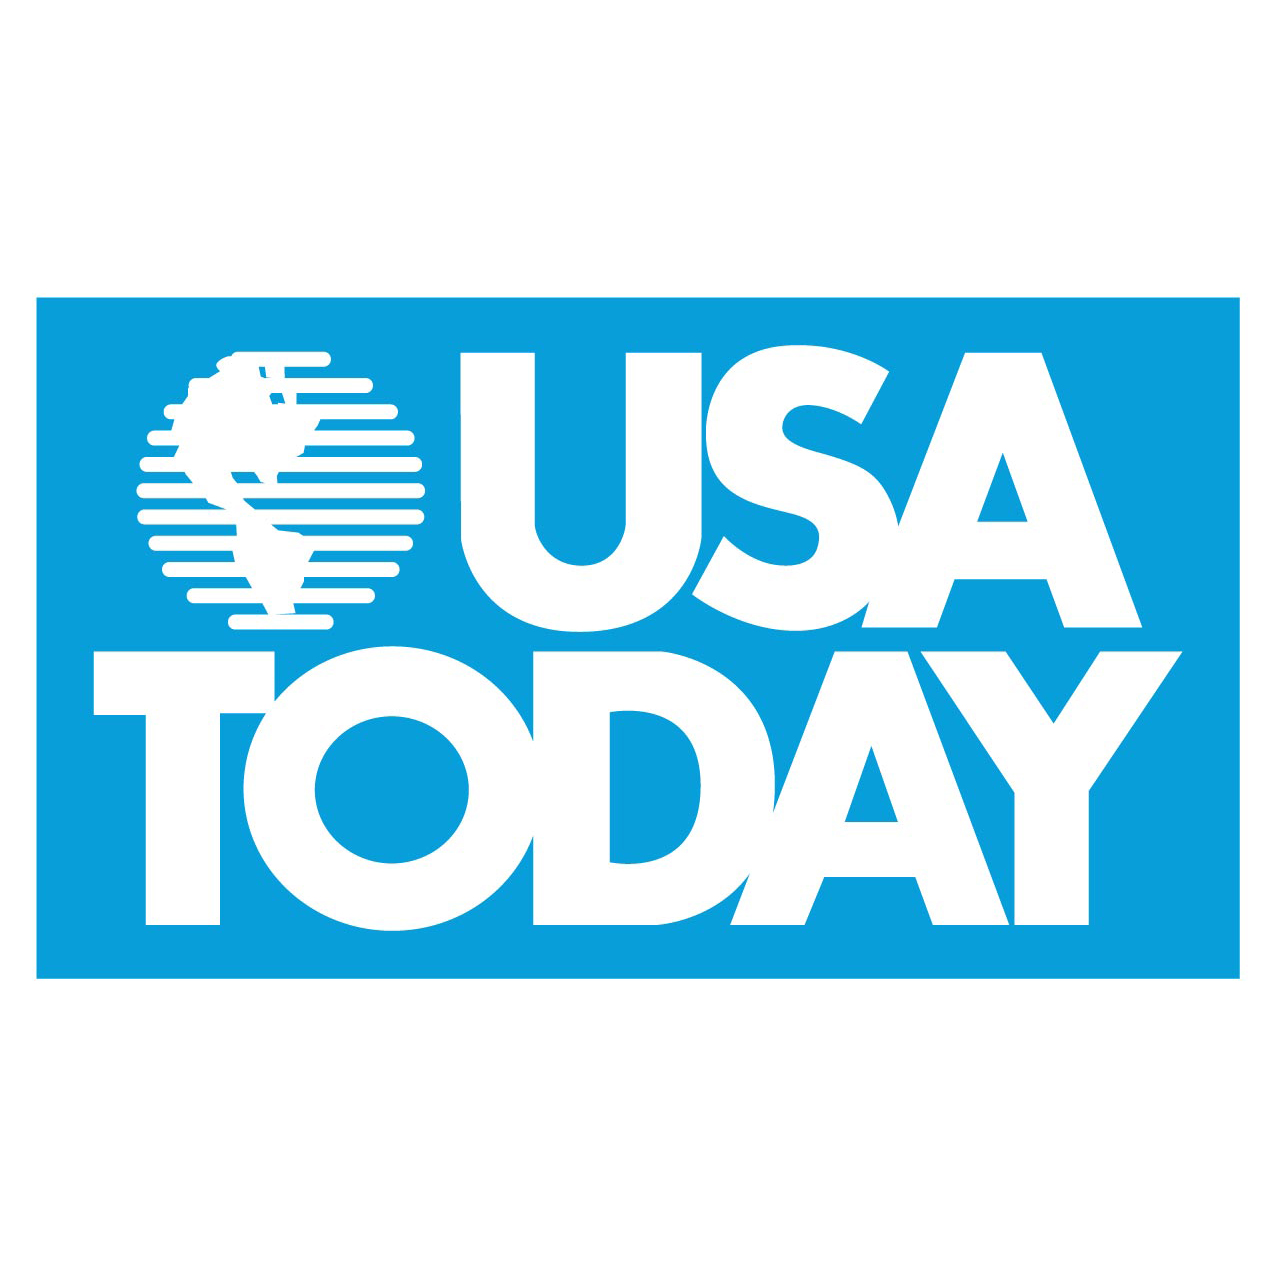 Doctor rating sites questioned on USA Today